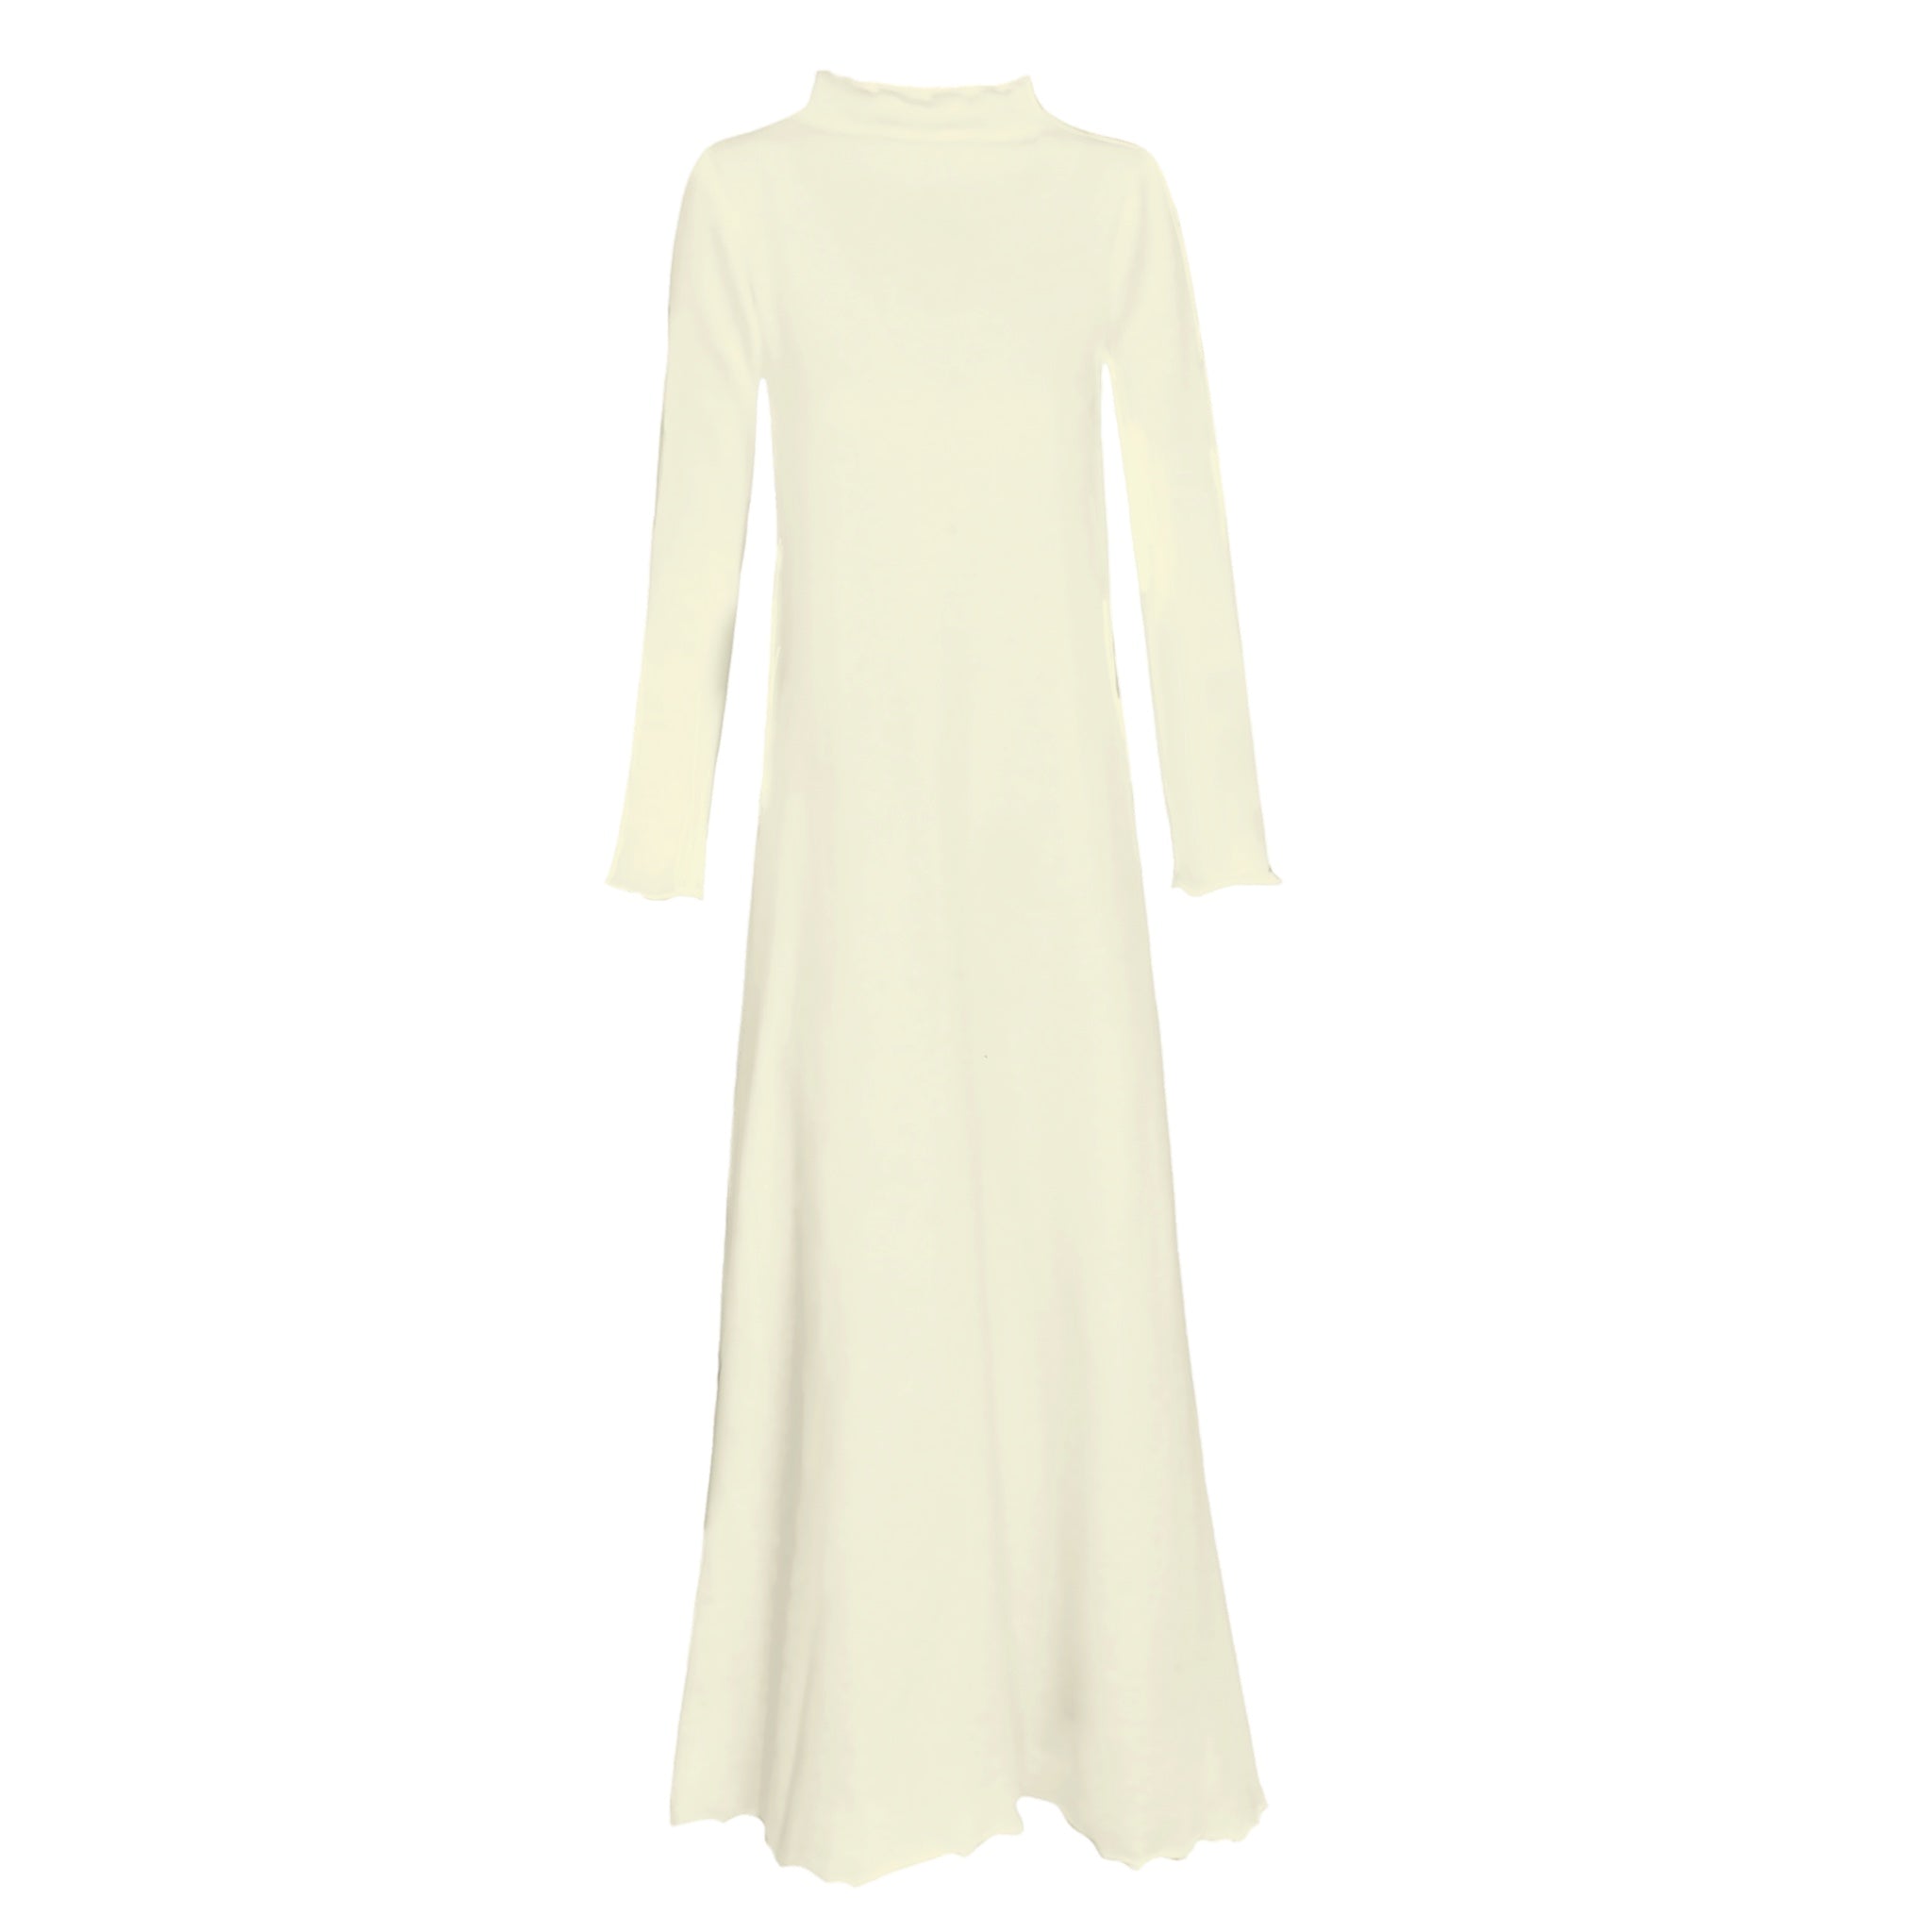 Women's Lounge Dress in Cream French Terry by Casey Marks